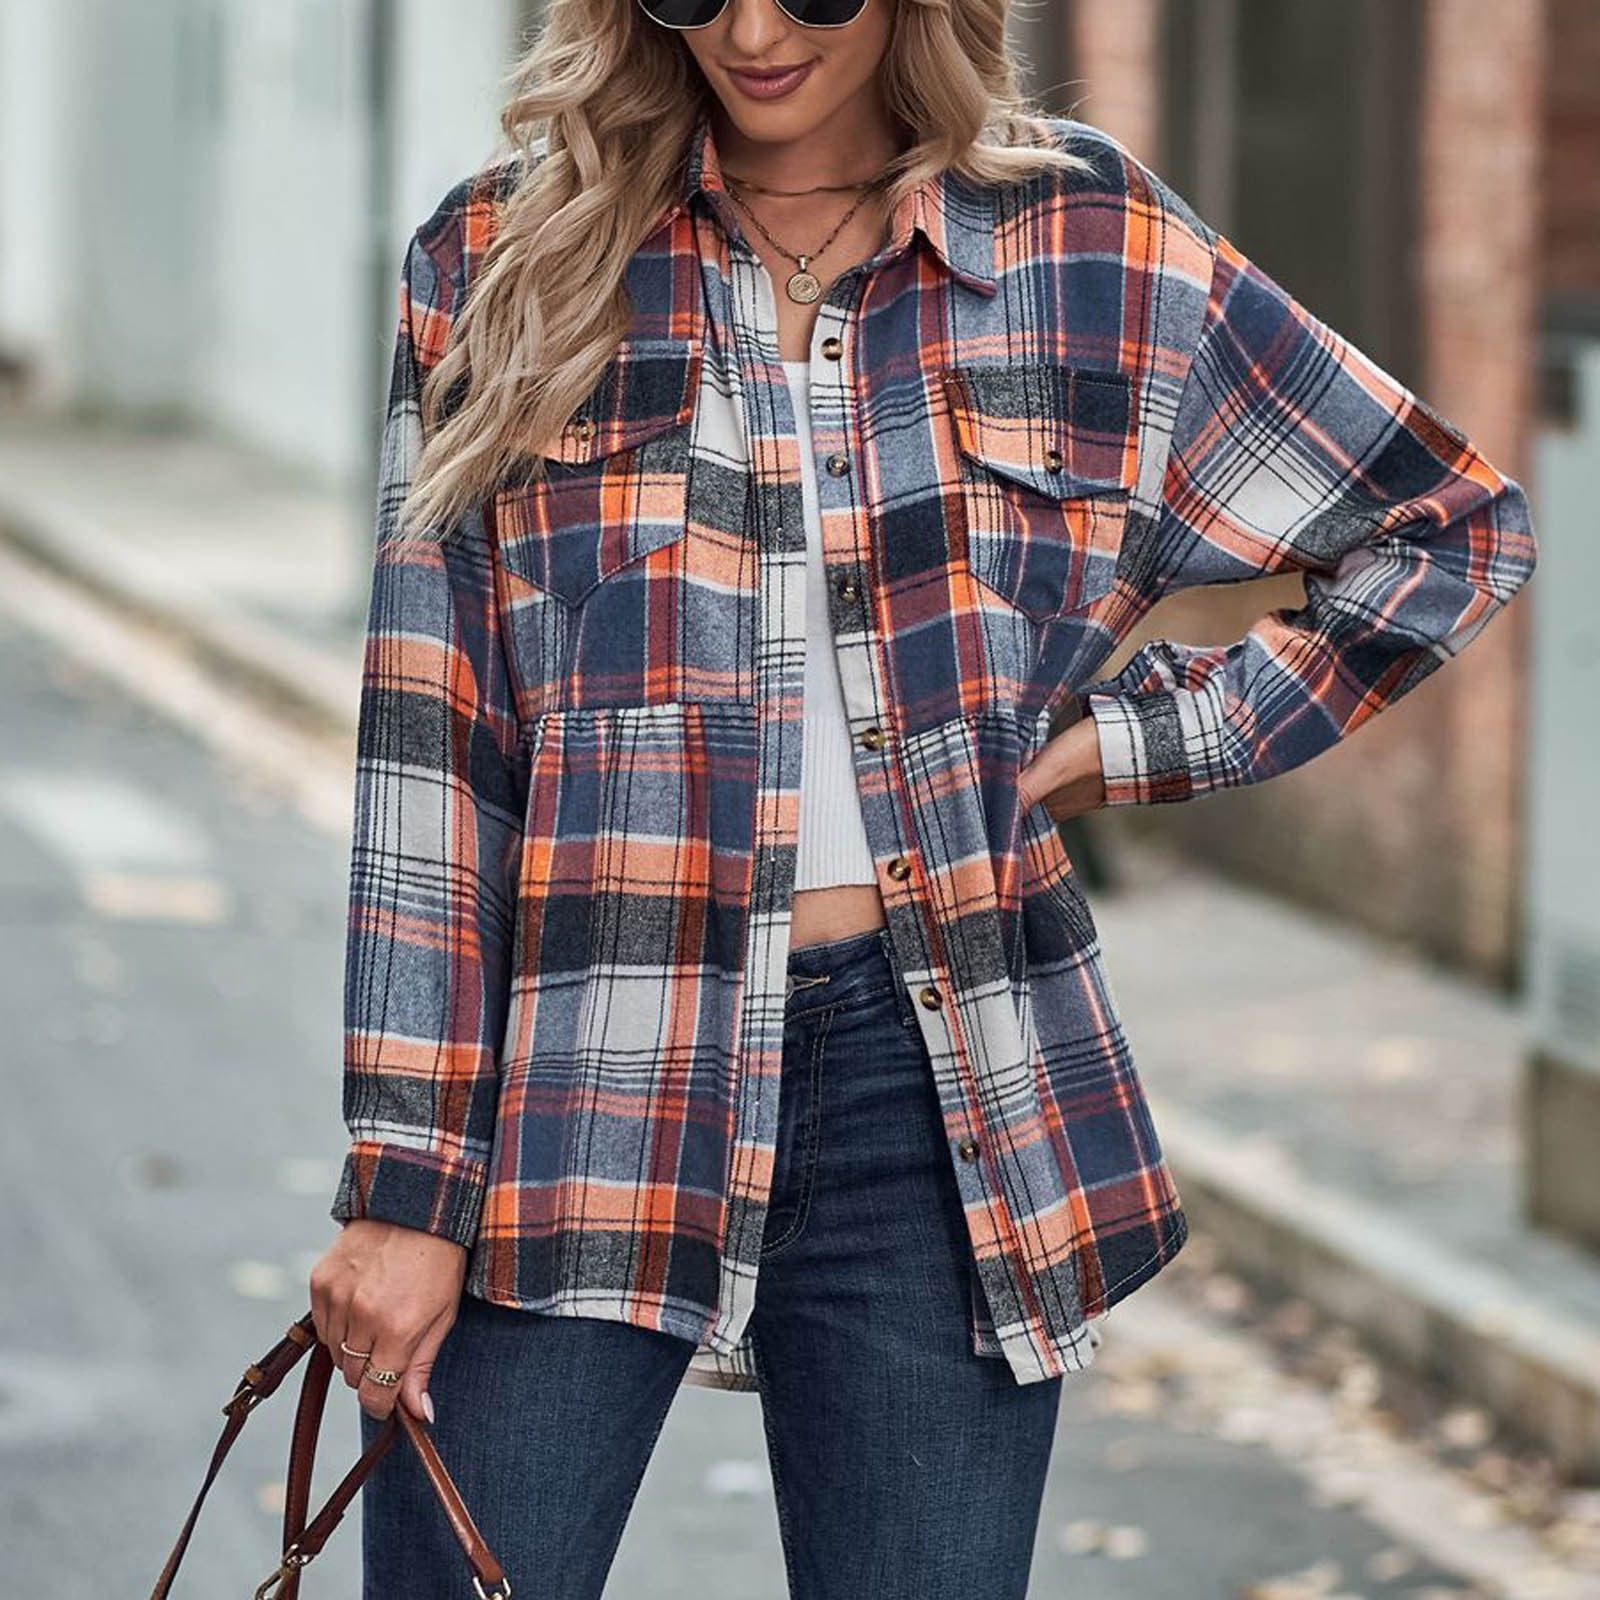 gbyLJF Womens Plaid Mid-Long Cardigan Oversized Lapel Roll Up Long Sleeve Tunic Tops with Pockets Fall Fashion 2023 Clothes